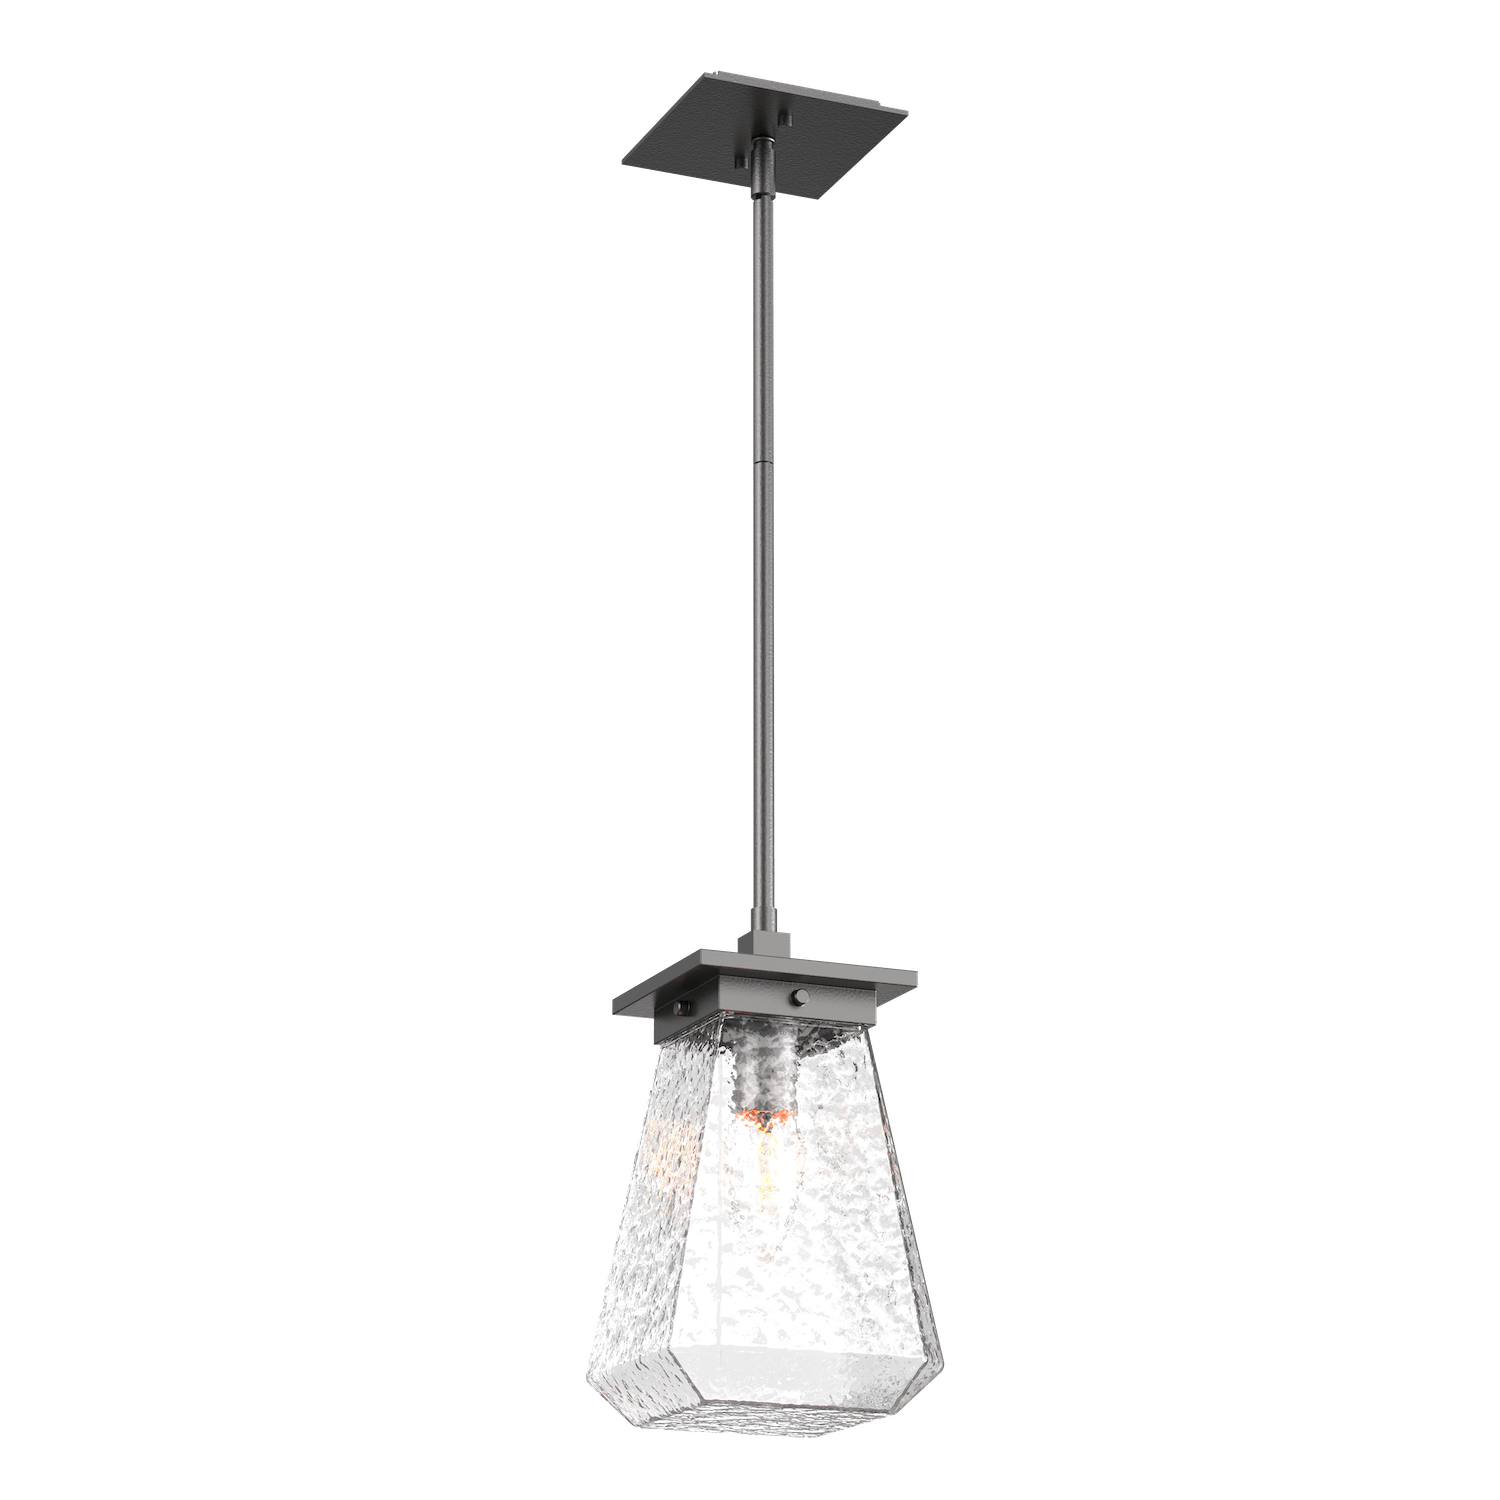 OPB0043-AH-AG-C-Hammerton-Studio-Beacon-14-inch-outdoor-pendant-light-with-argento-grey-finish-and-clear-blown-glass-shades-and-incandescent-lamping